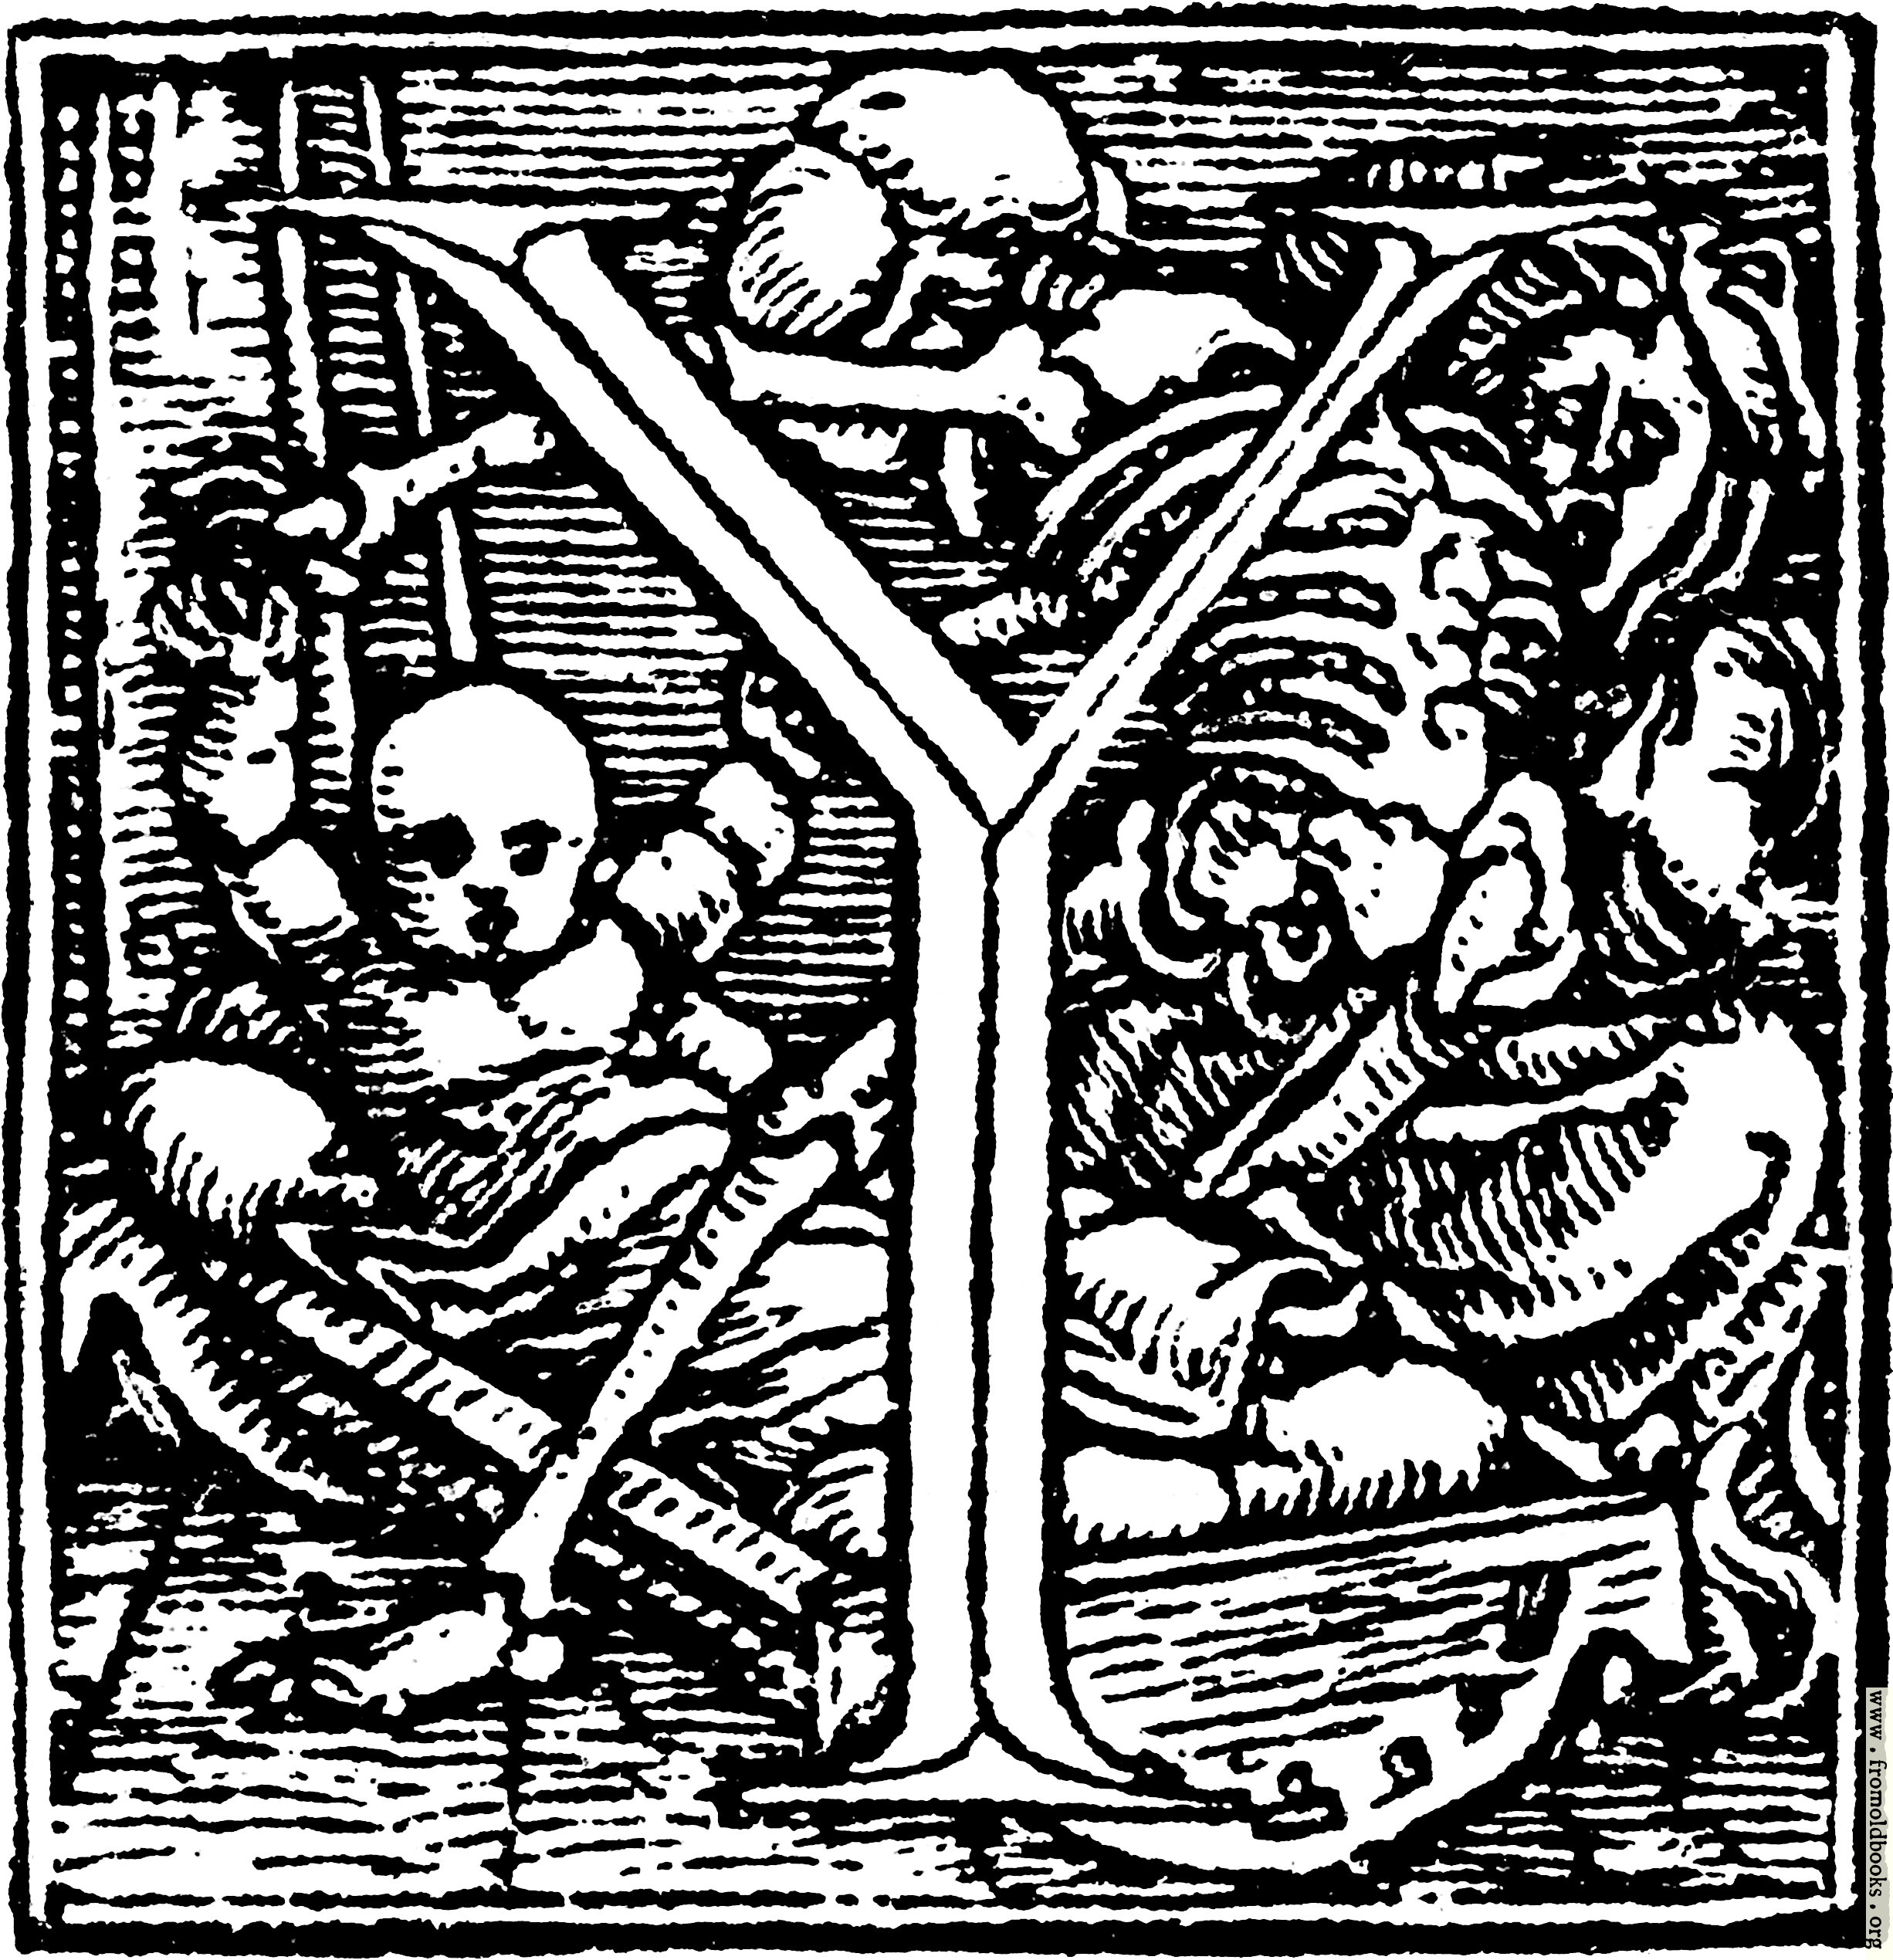 [Picture: 62y.—Initial capital letter “Y” from Dance of Death Alphabet.]